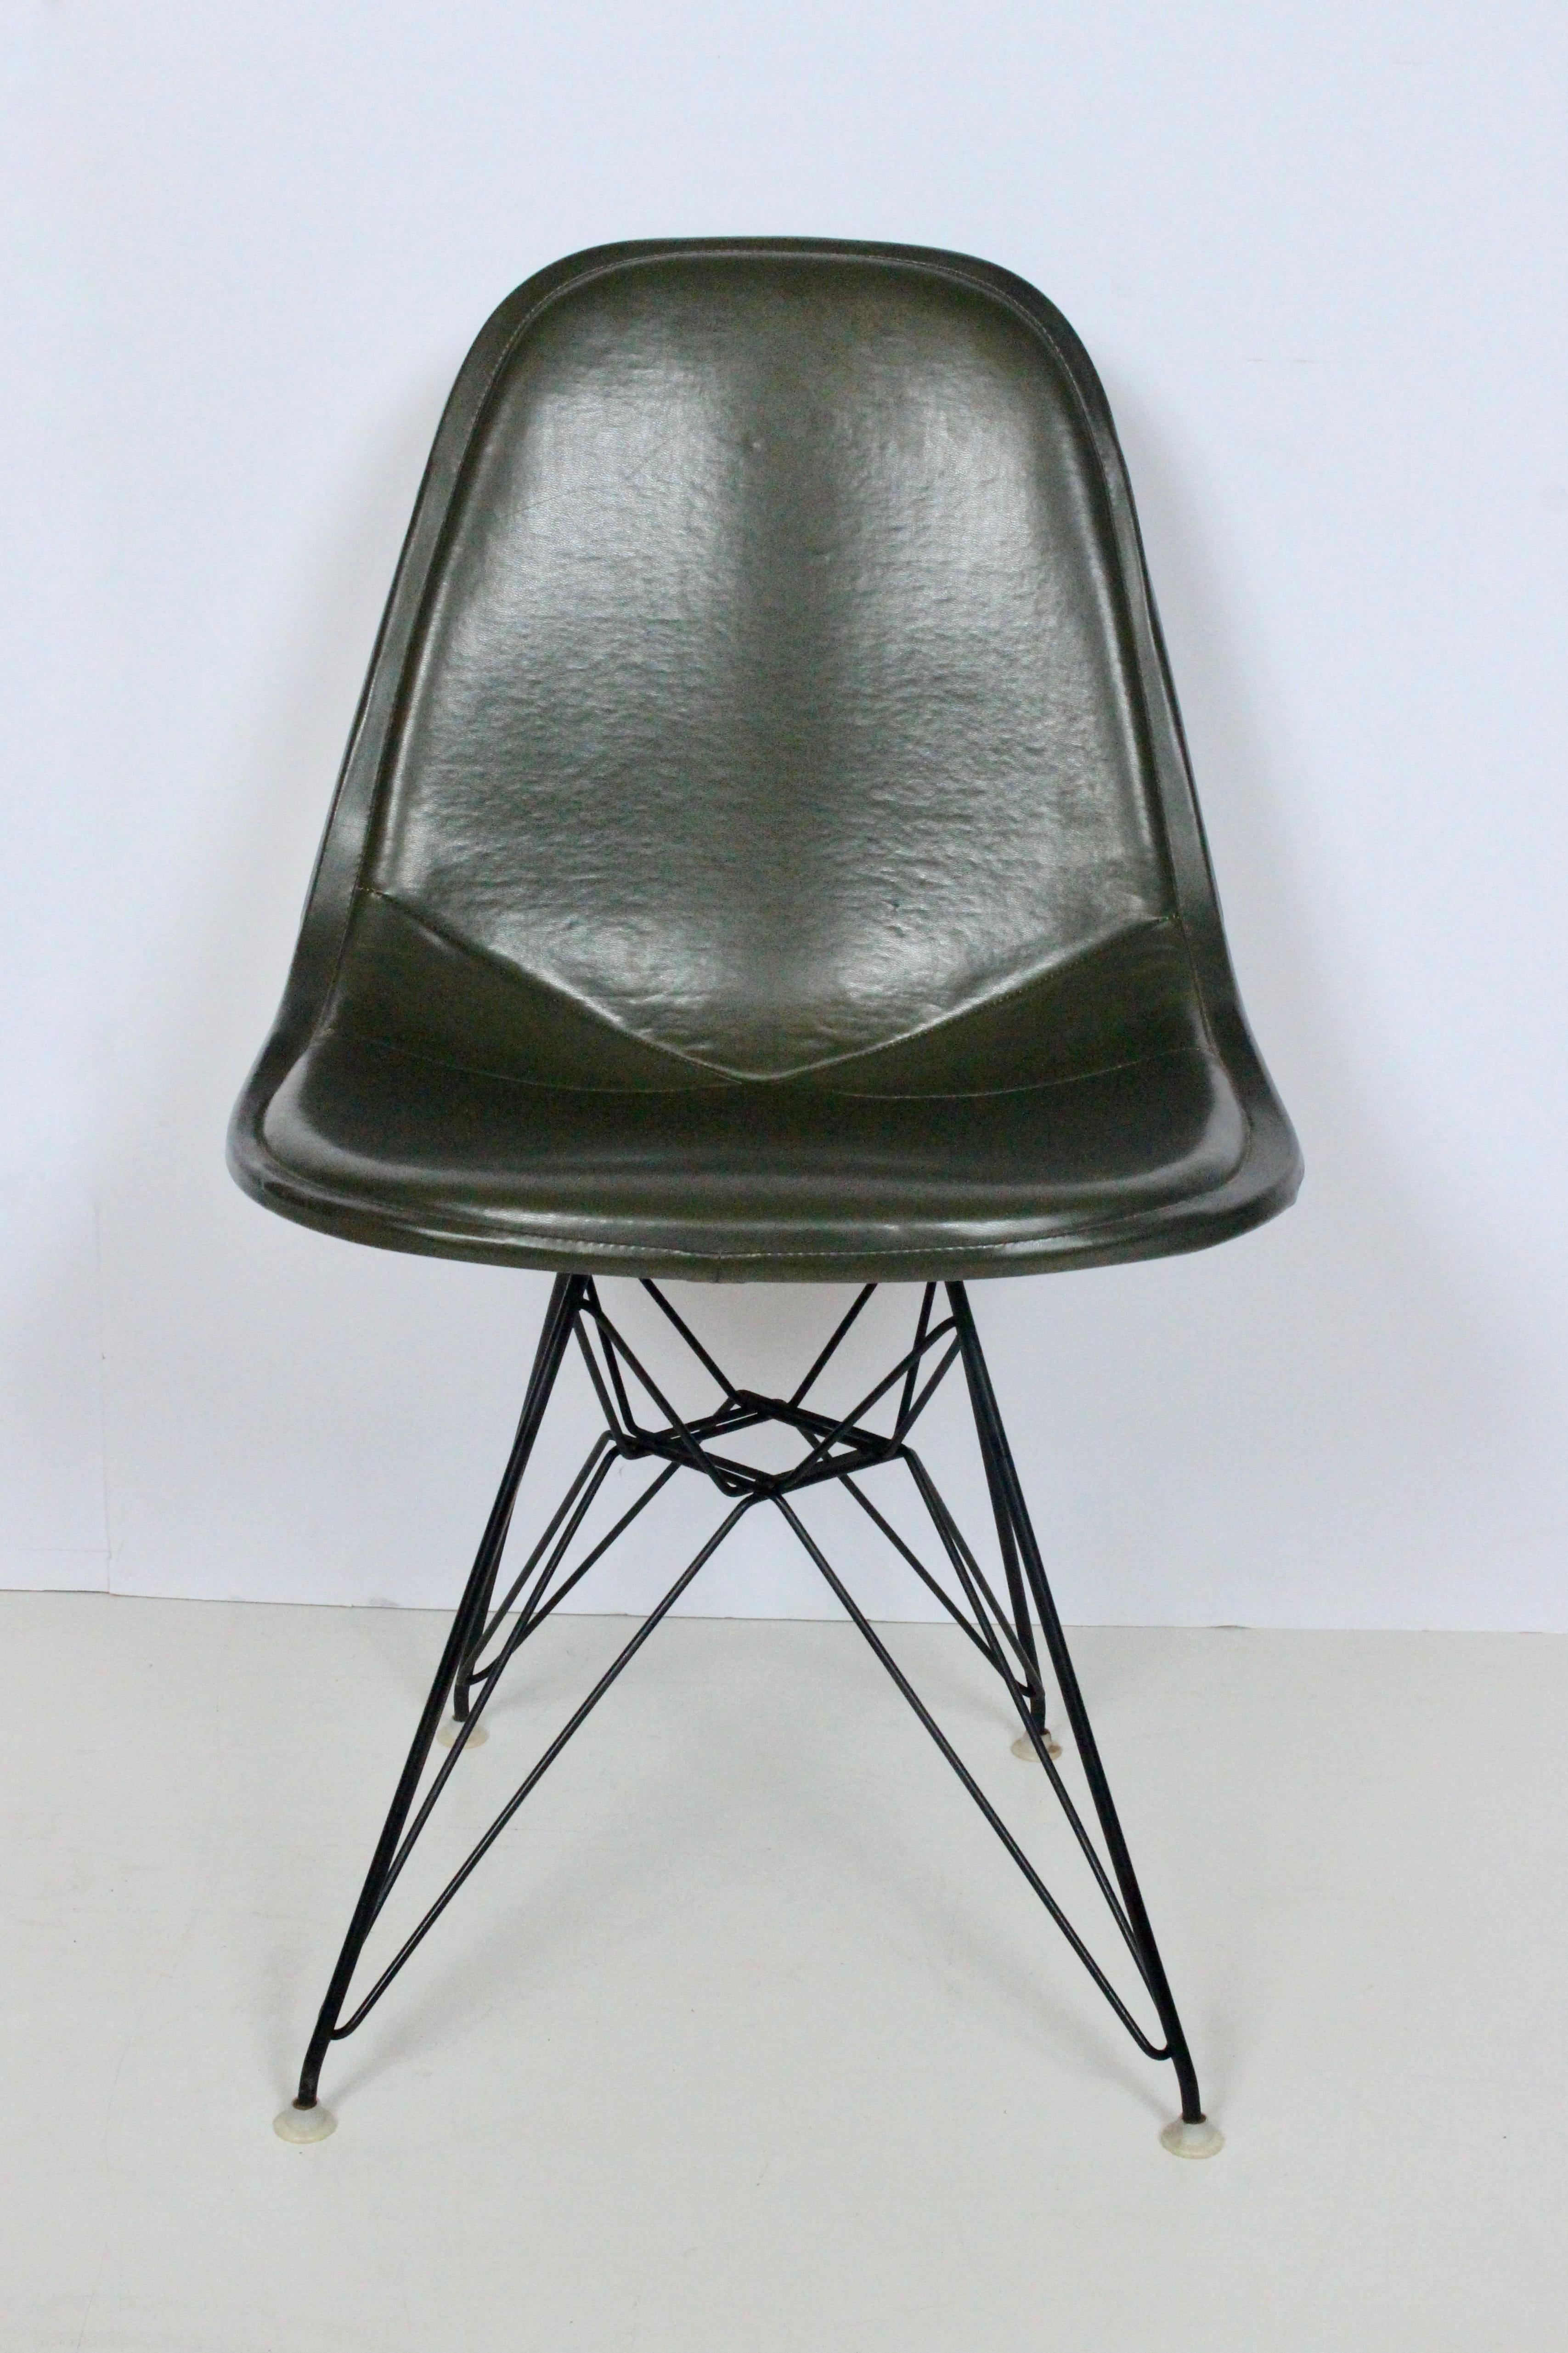 Late 20th Century Eames for Herman Miller Dark Olive Eiffel Tower Desk Chair, 1970's